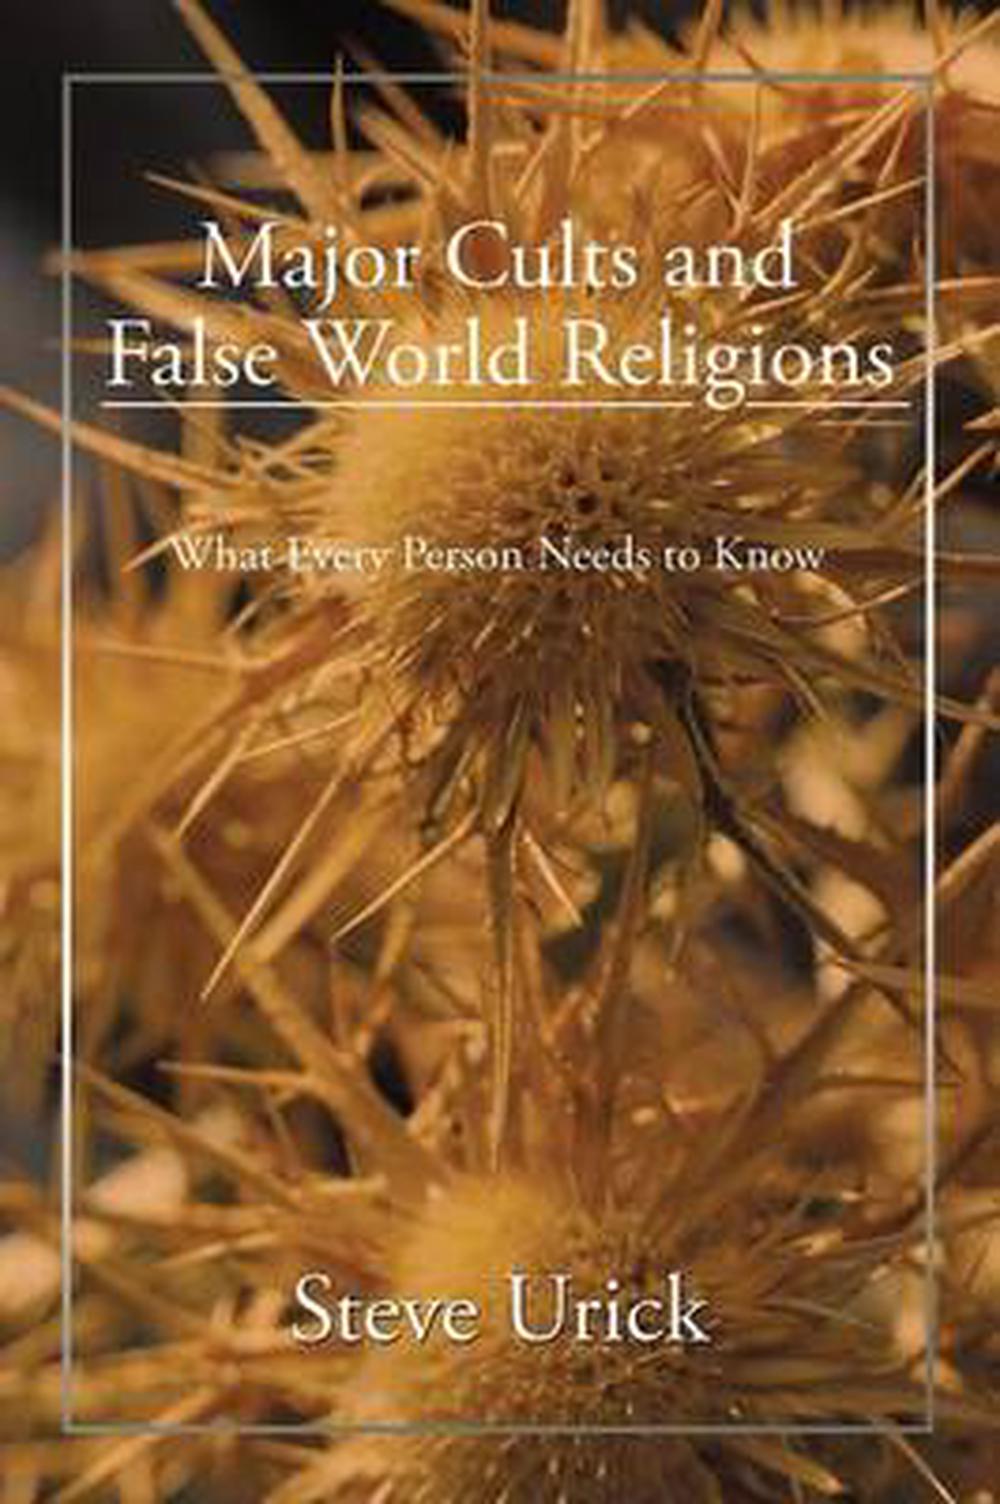 Major Cults and False World Religions by Steve Urick (English